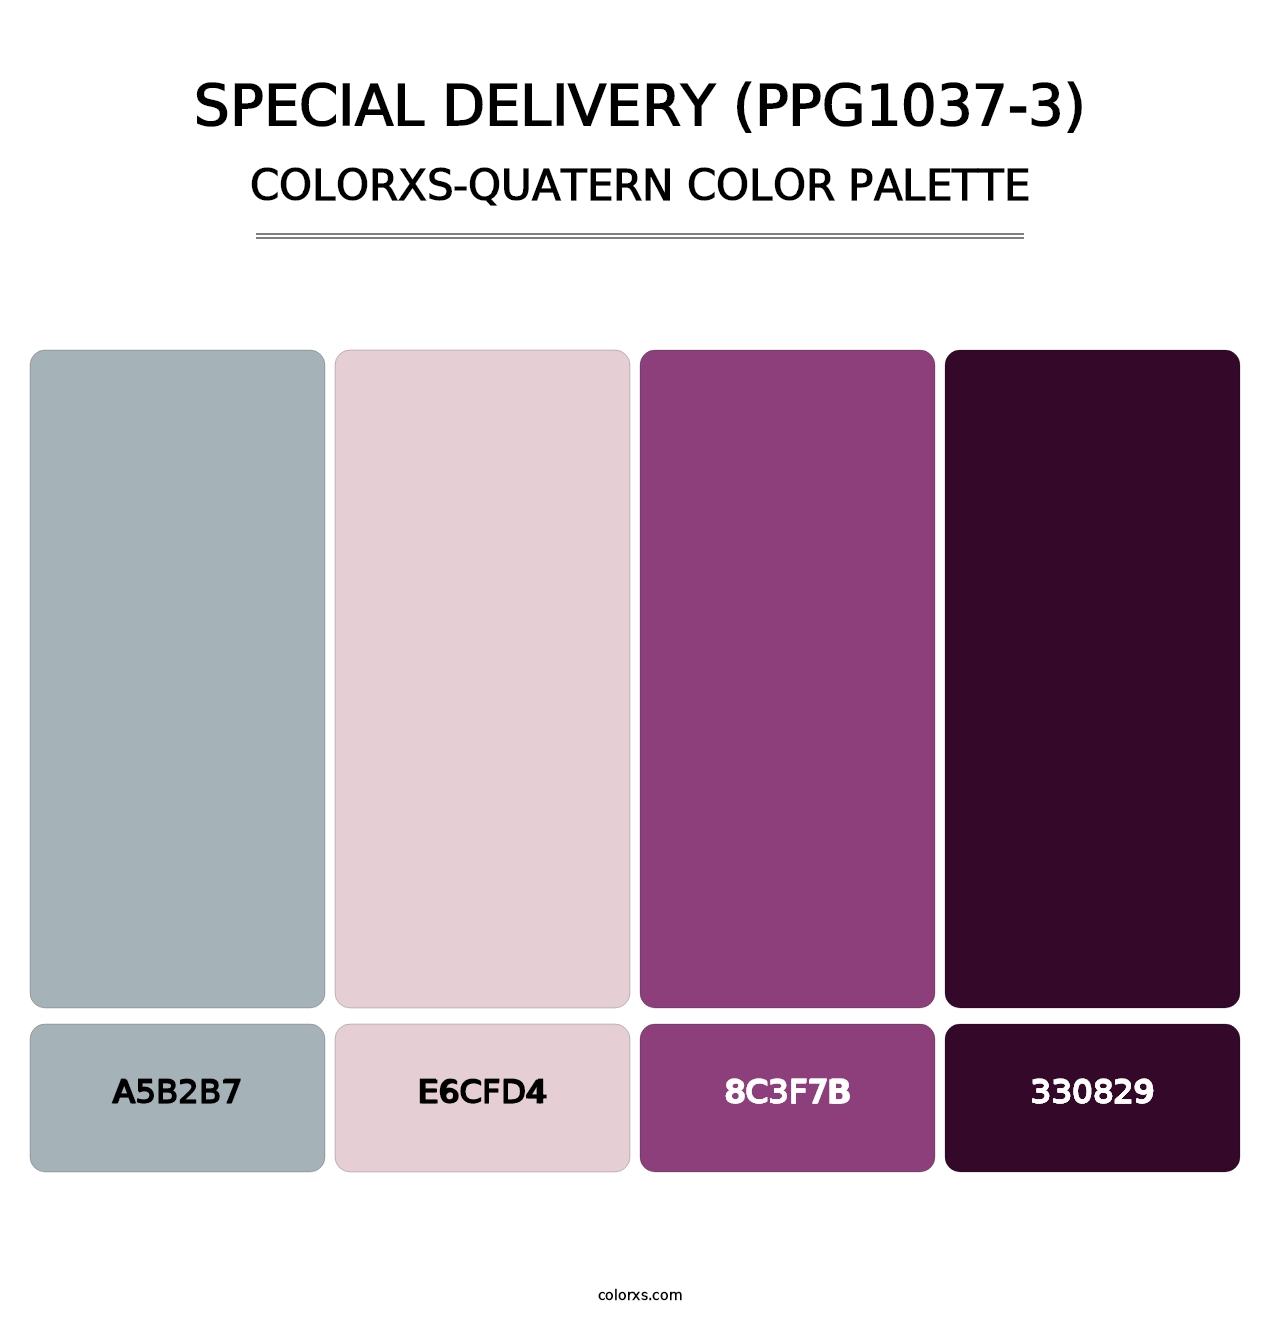 Special Delivery (PPG1037-3) - Colorxs Quatern Palette